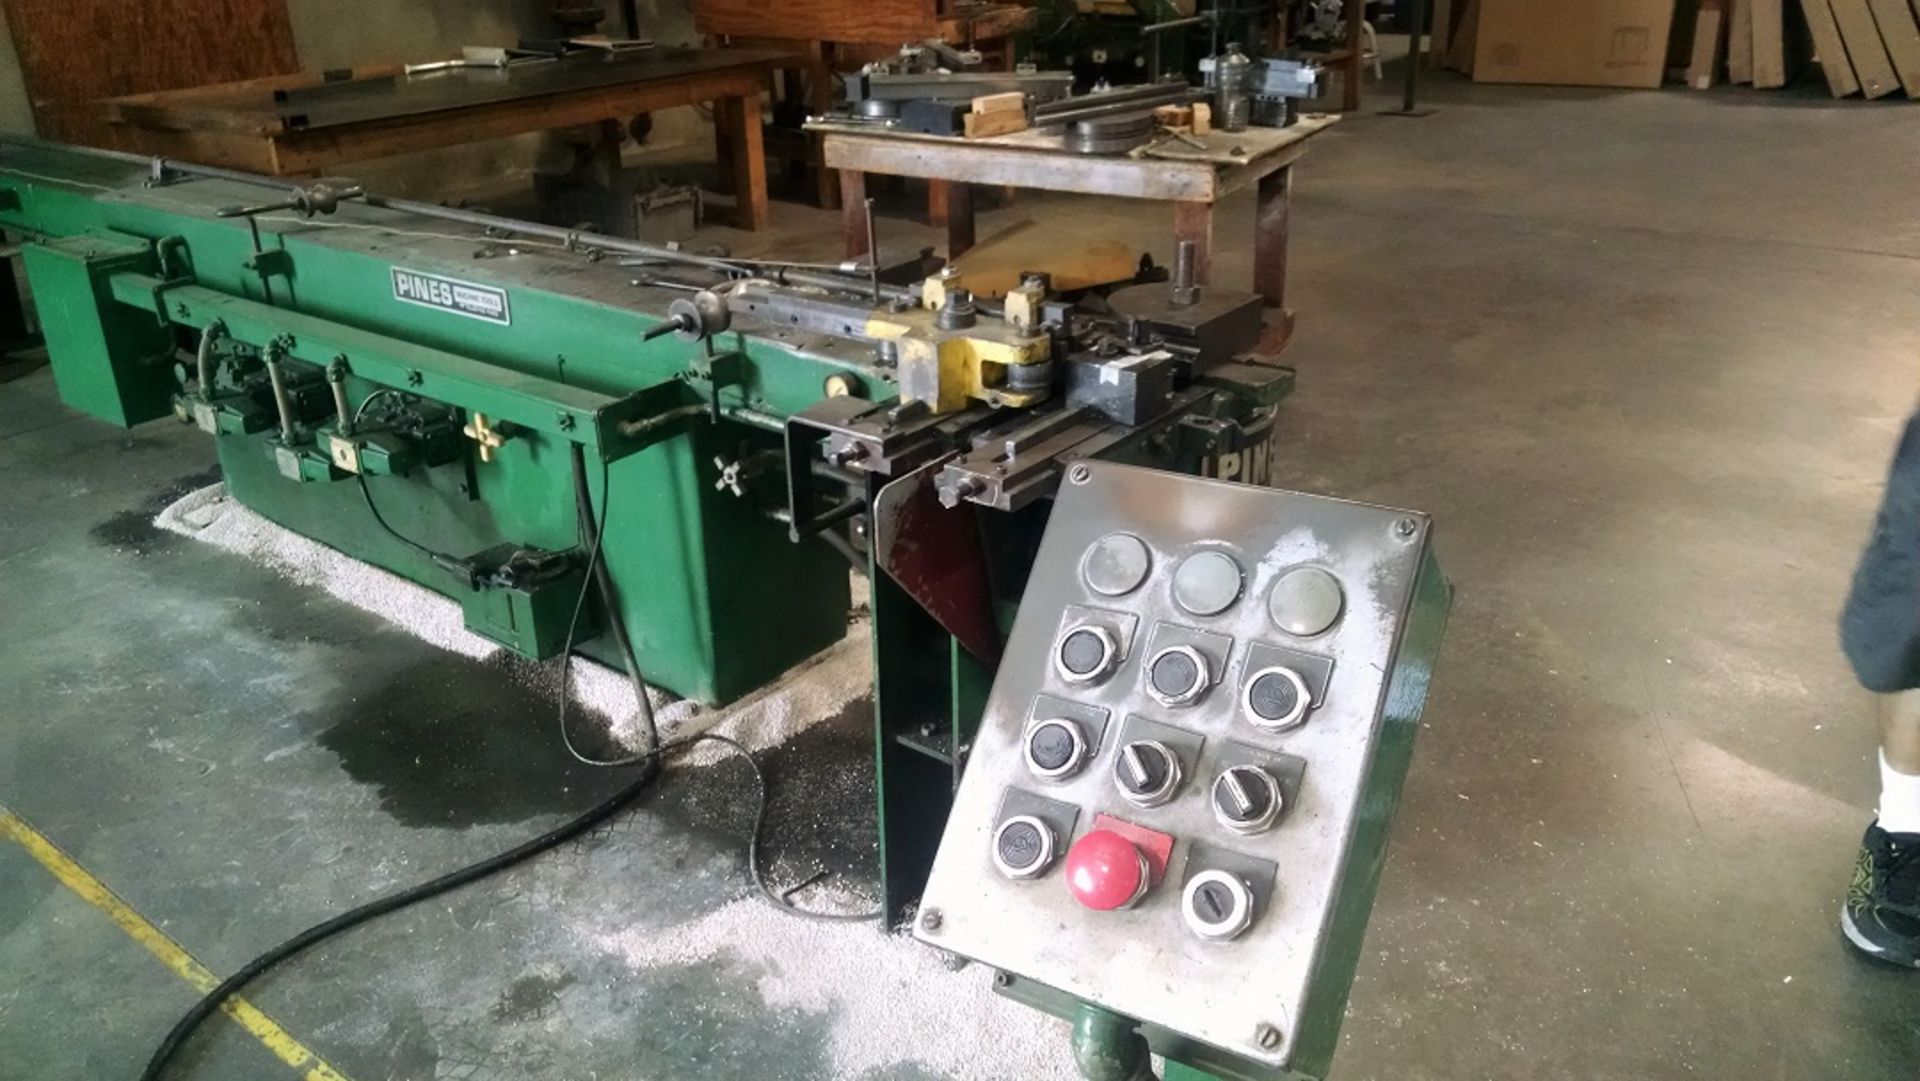 PINES Hydraulic Rotary Bending Machine, Counter Clockwise Bend Model 1